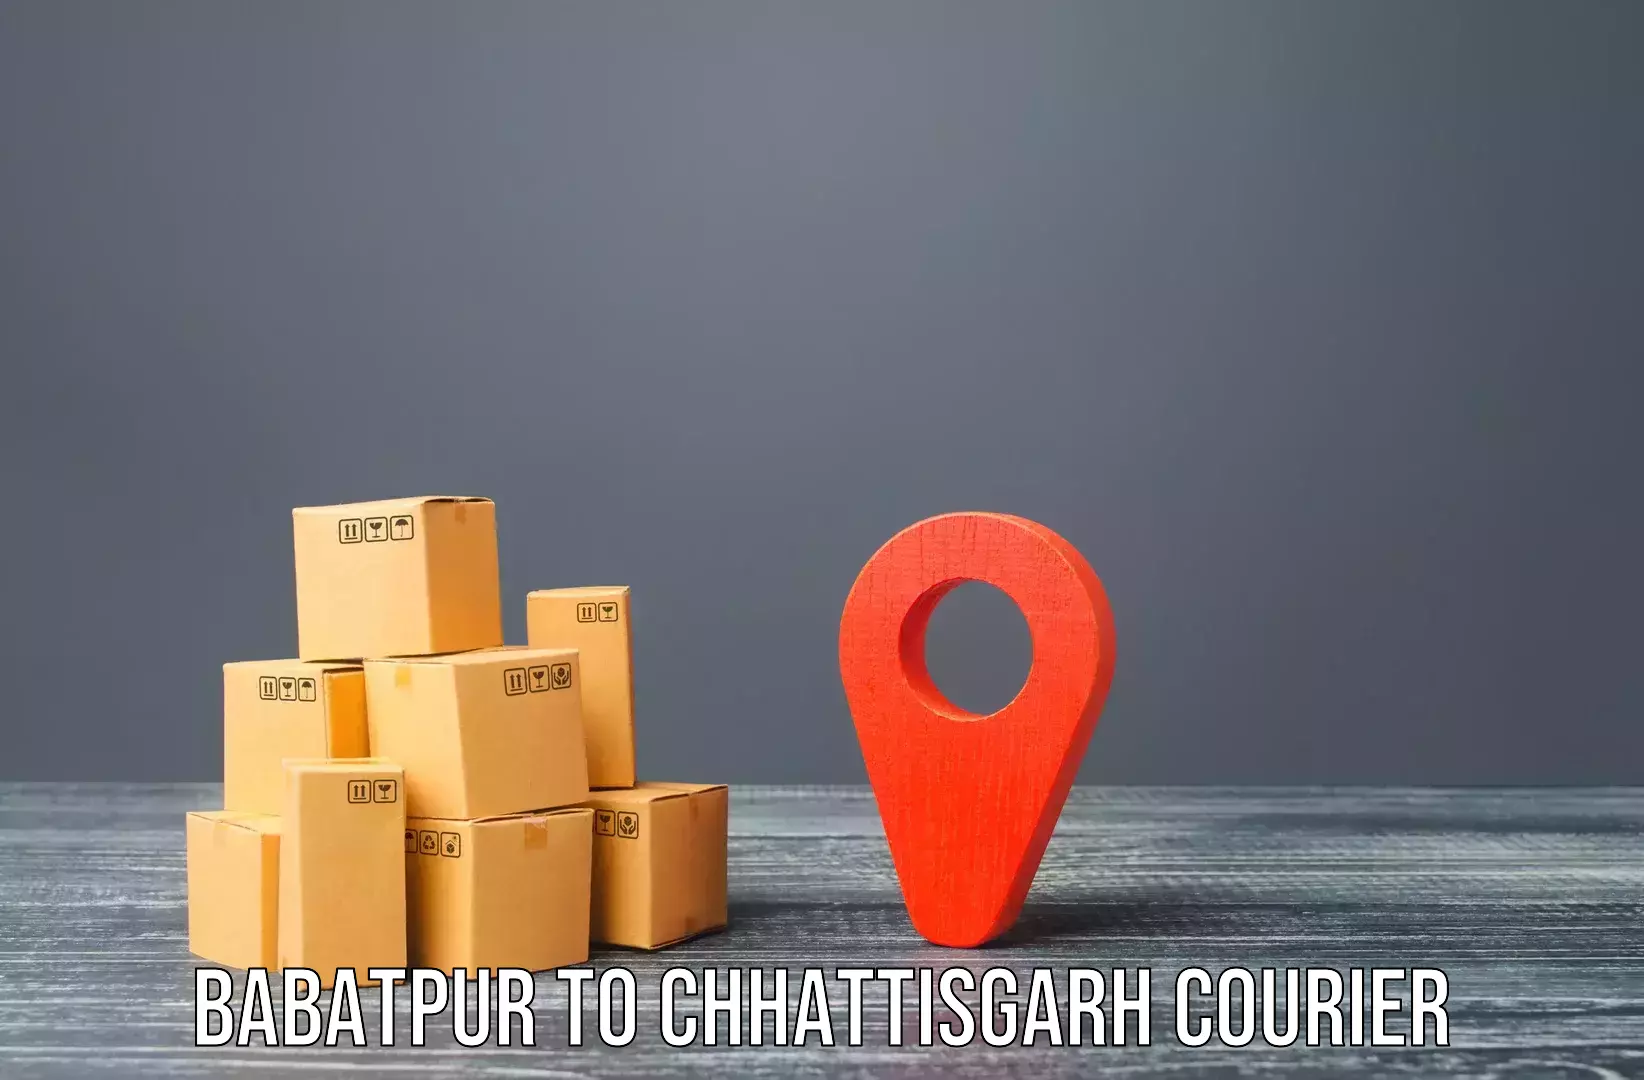 Expert goods movers Babatpur to Pratappur